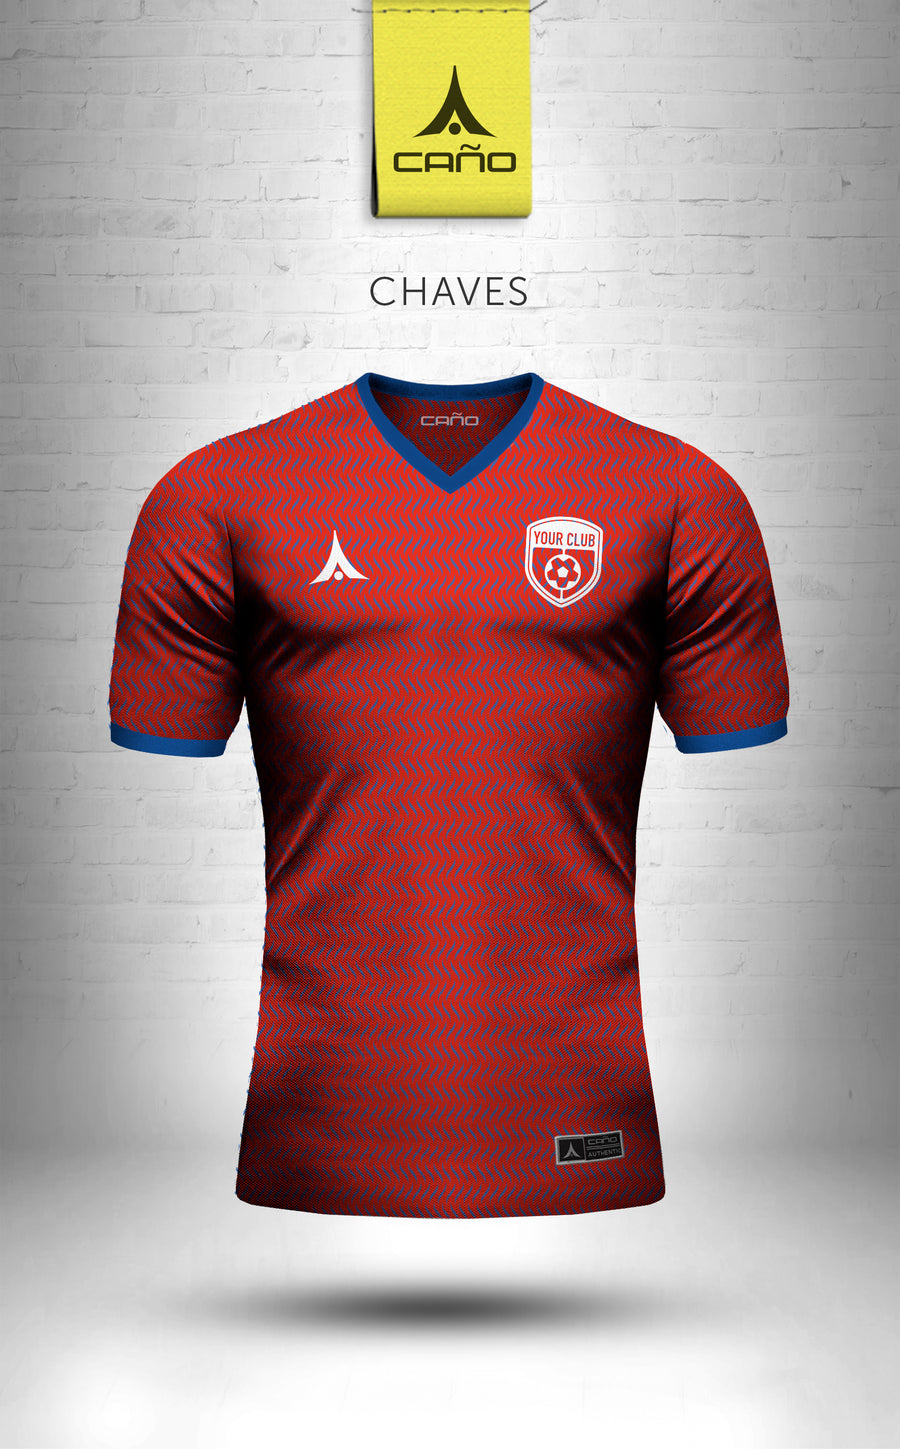 Chaves in red/blue/white